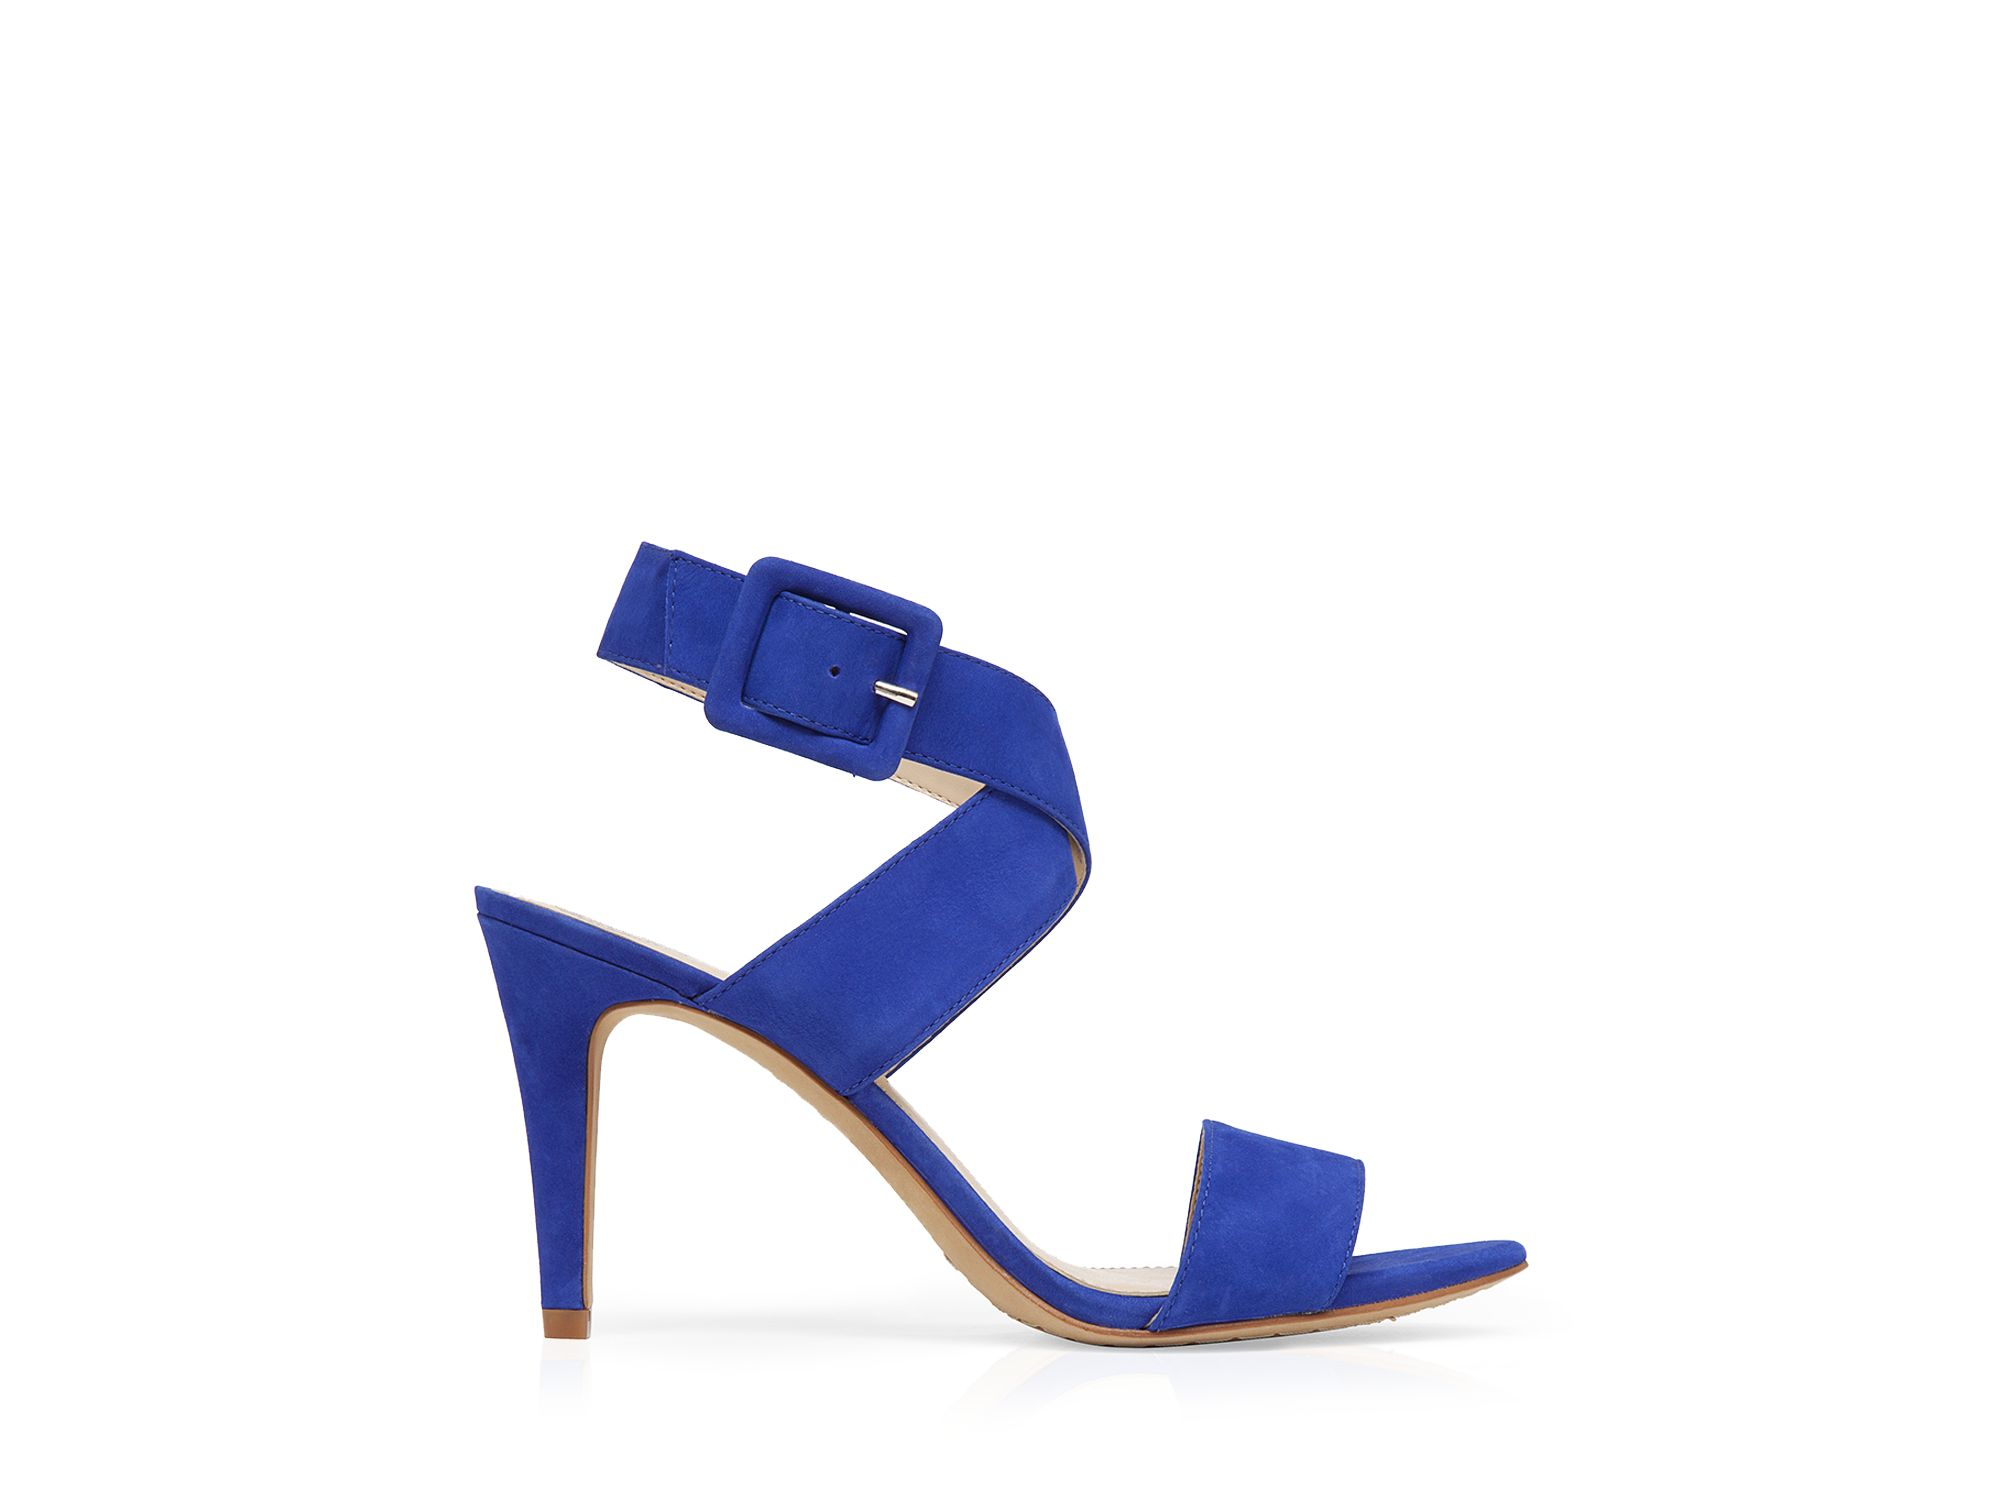 Lyst - Vince Camuto Open Toe Sandals - Casara High Heel in Blue